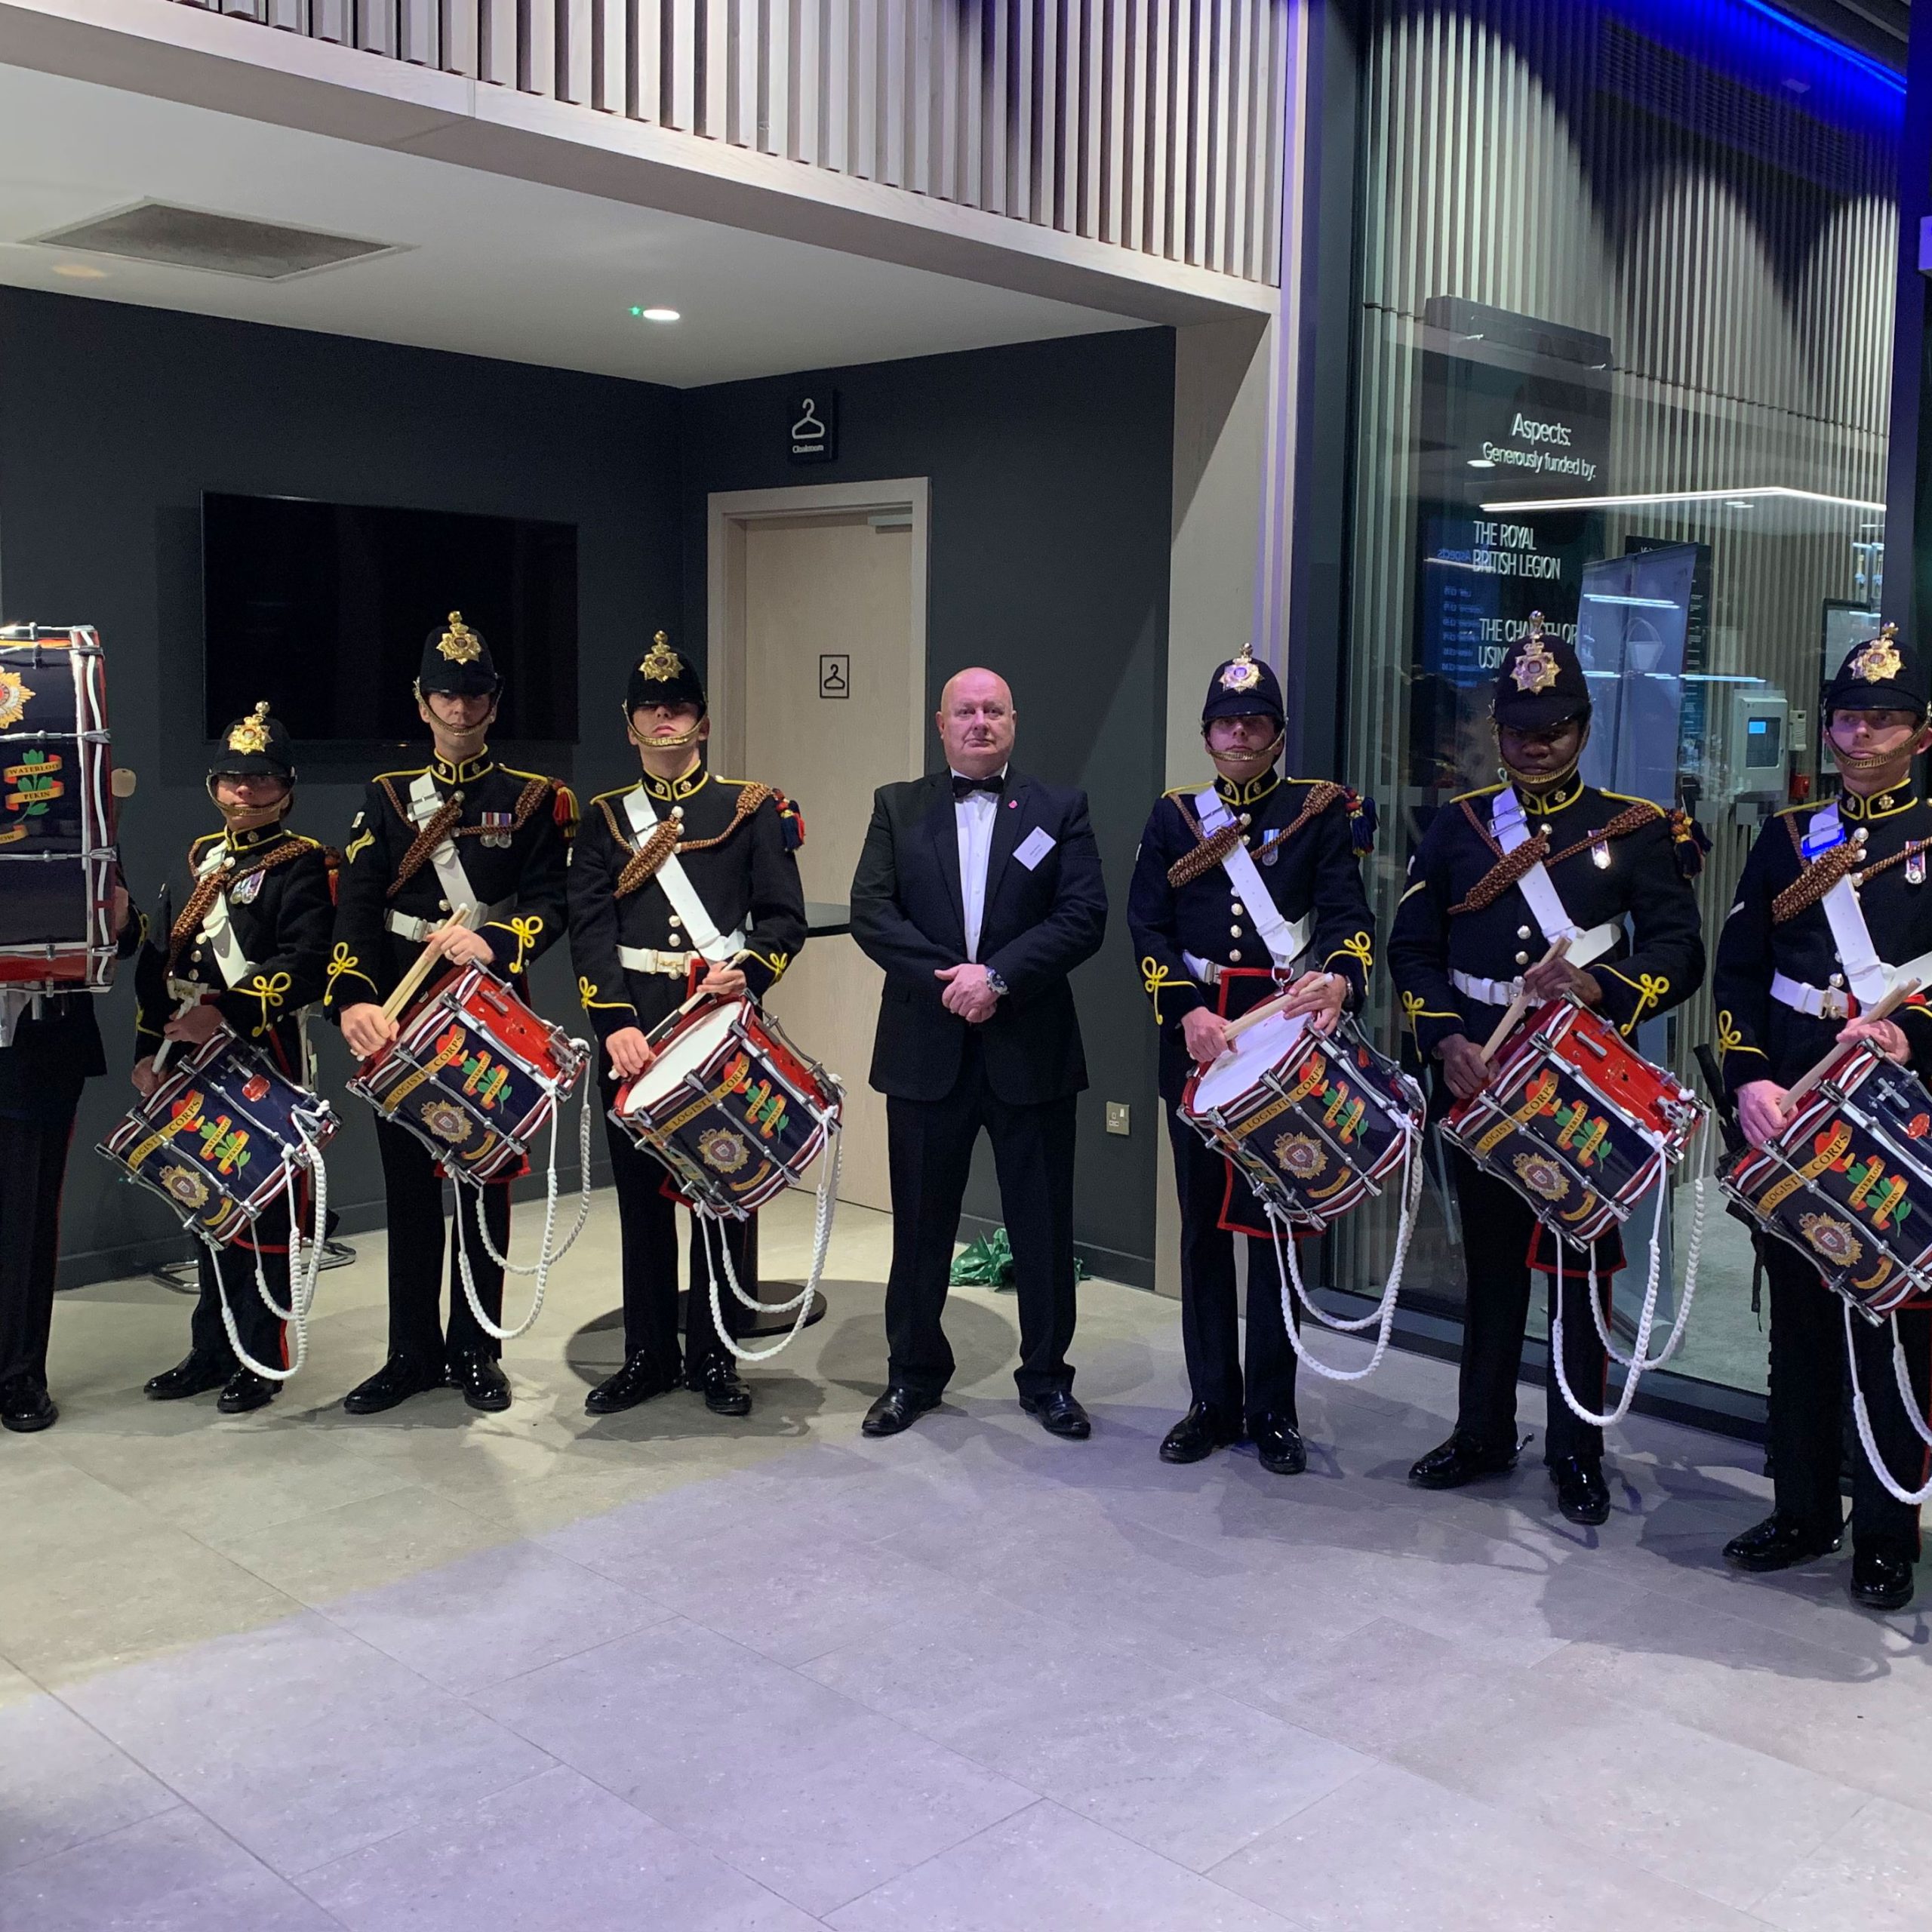 derek vinning with the royal logistics corps of drums